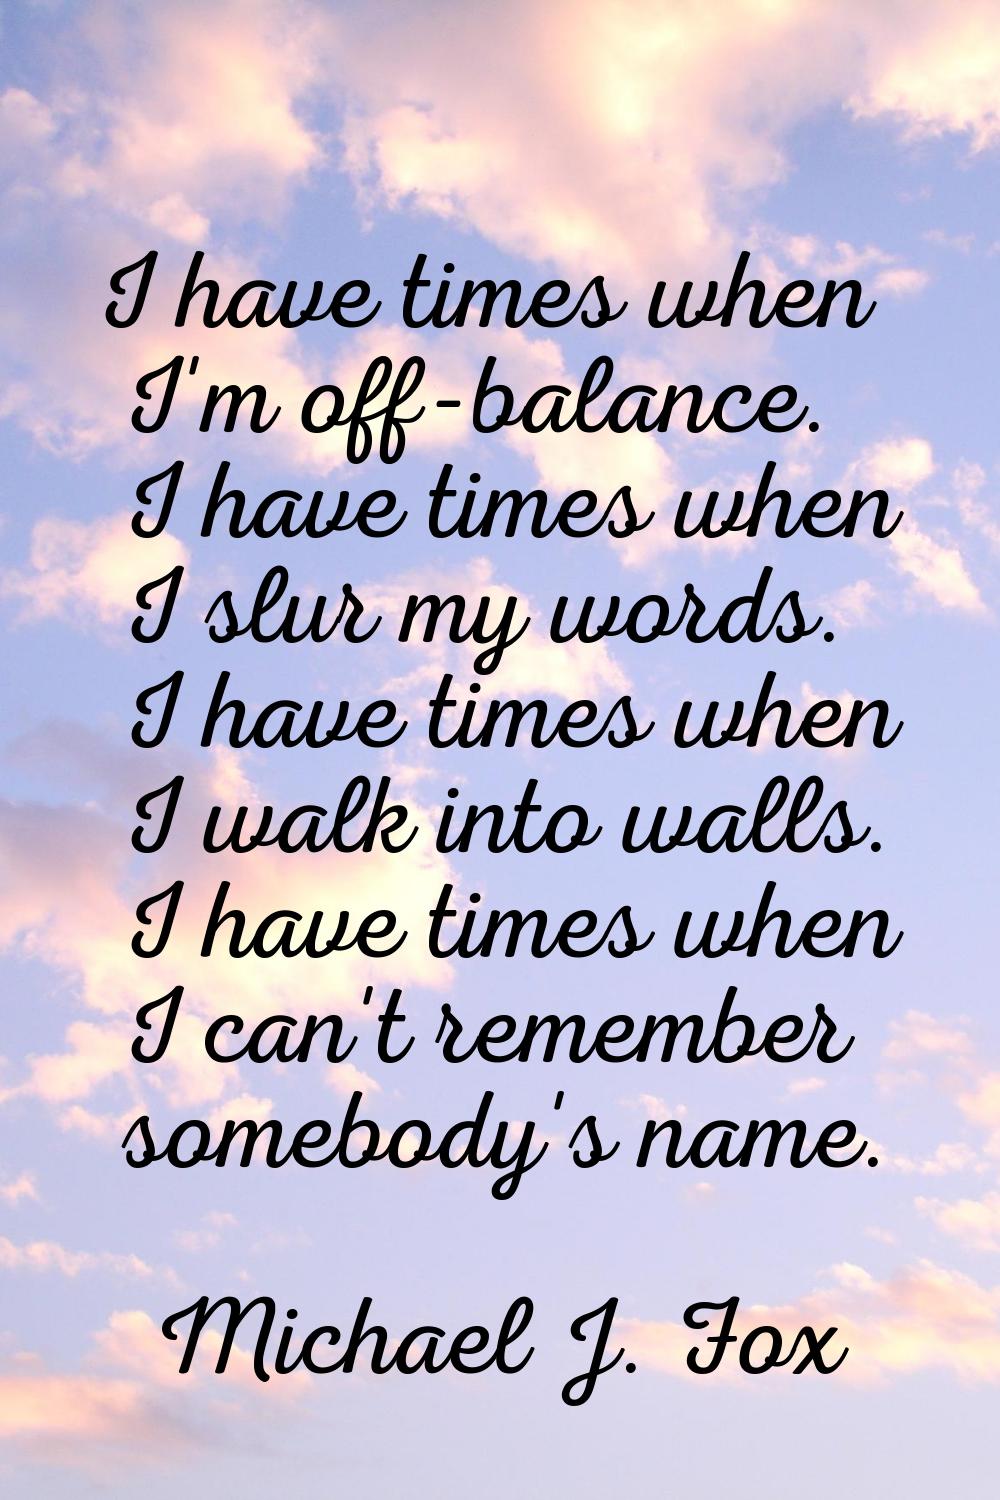 I have times when I'm off-balance. I have times when I slur my words. I have times when I walk into